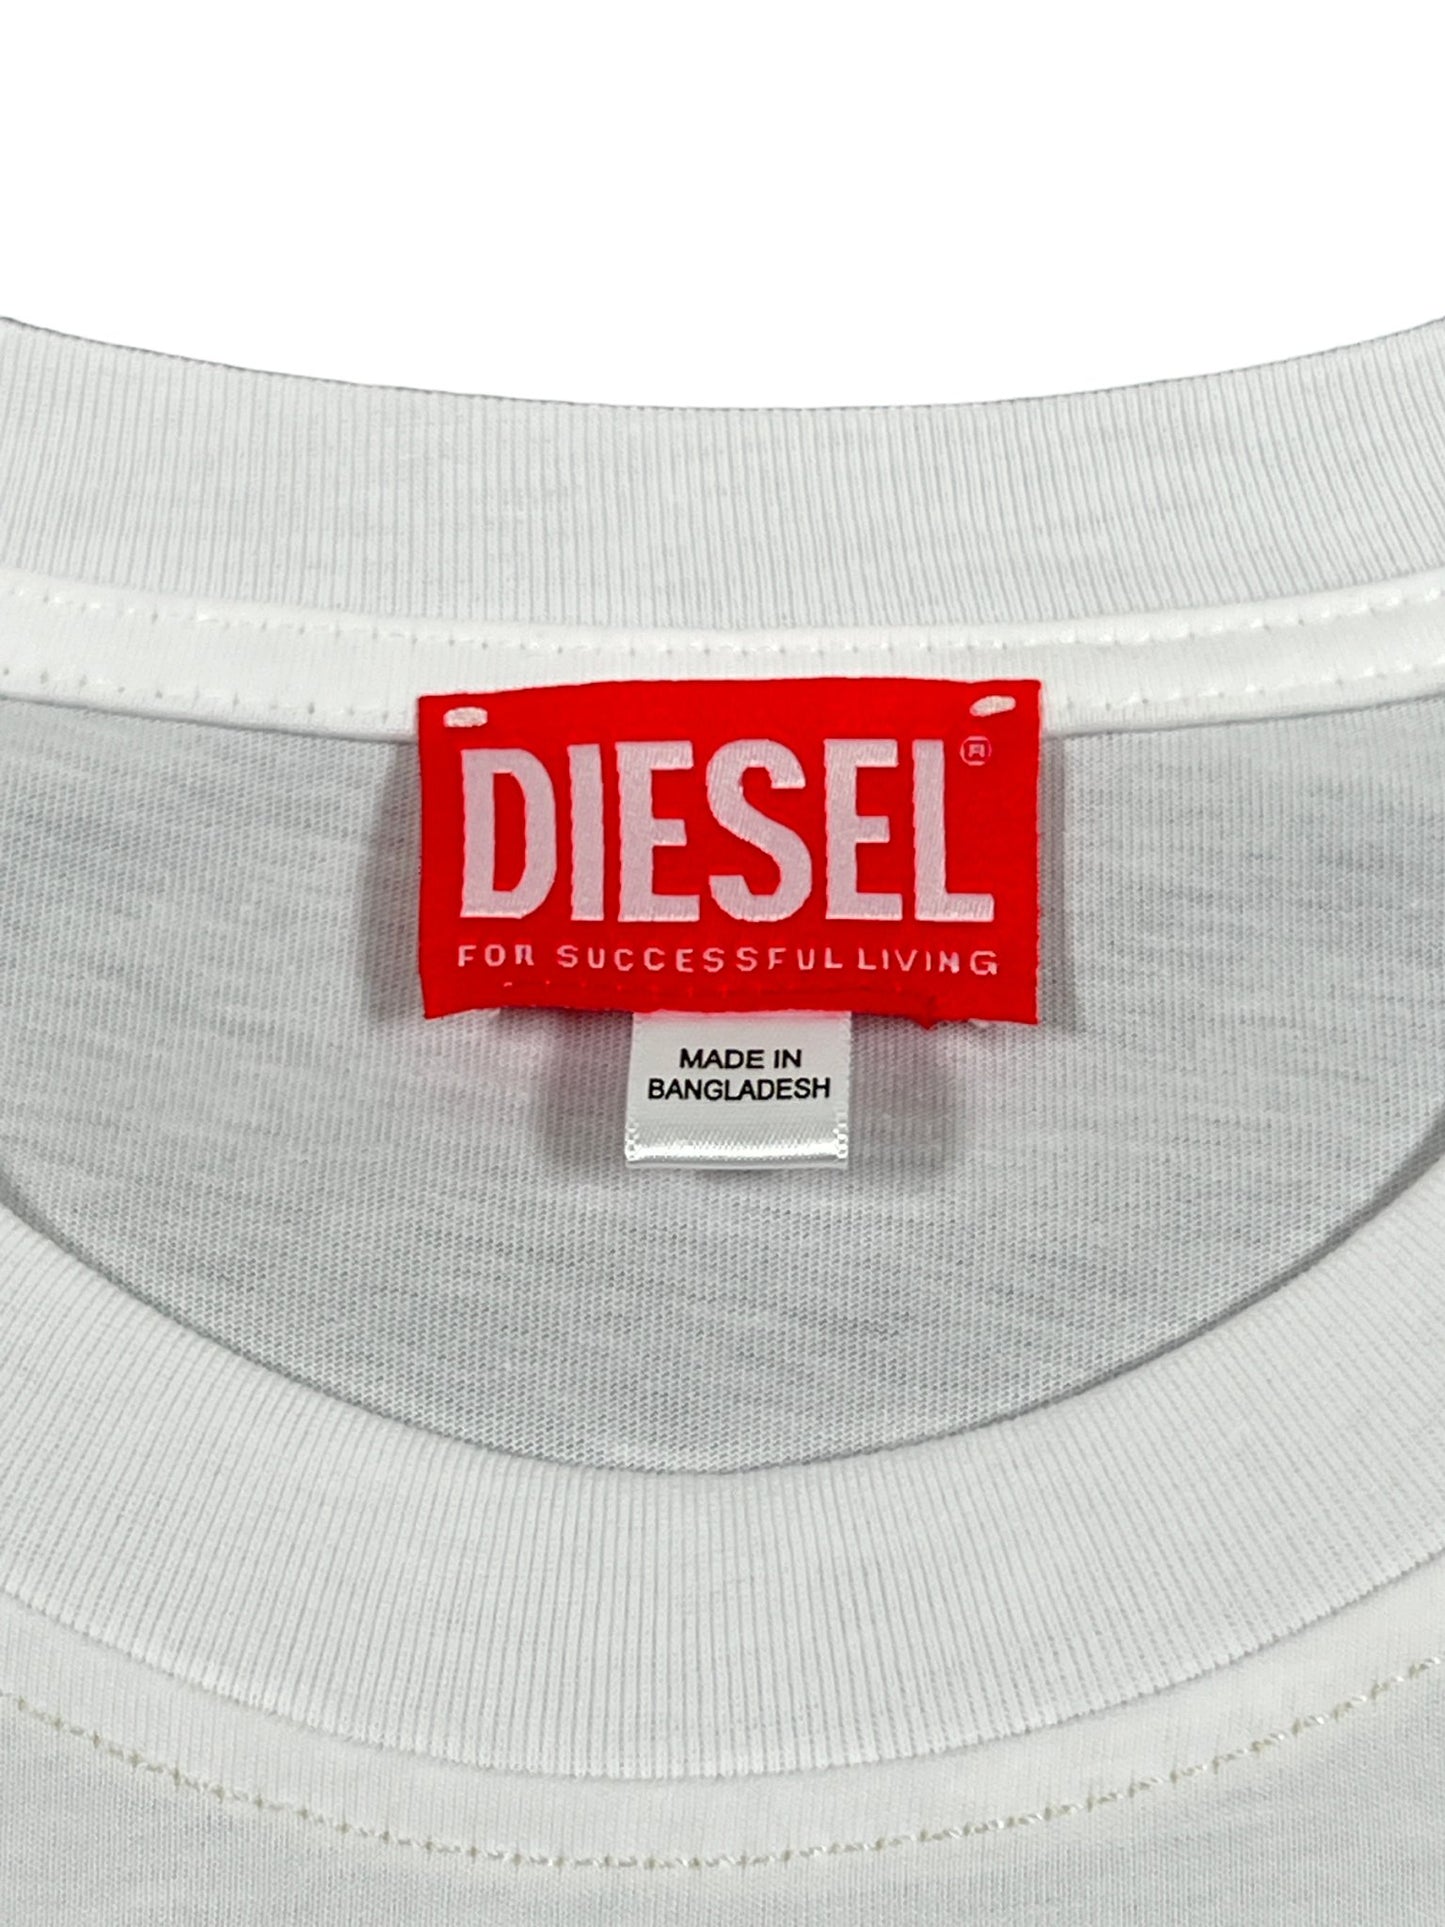 A close-up of a white 100% Cotton DIESEL brand garment label showing "made in Bangladesh" on the DIESEL T-DIEGOR-K73 T-SHIRT WHITE.